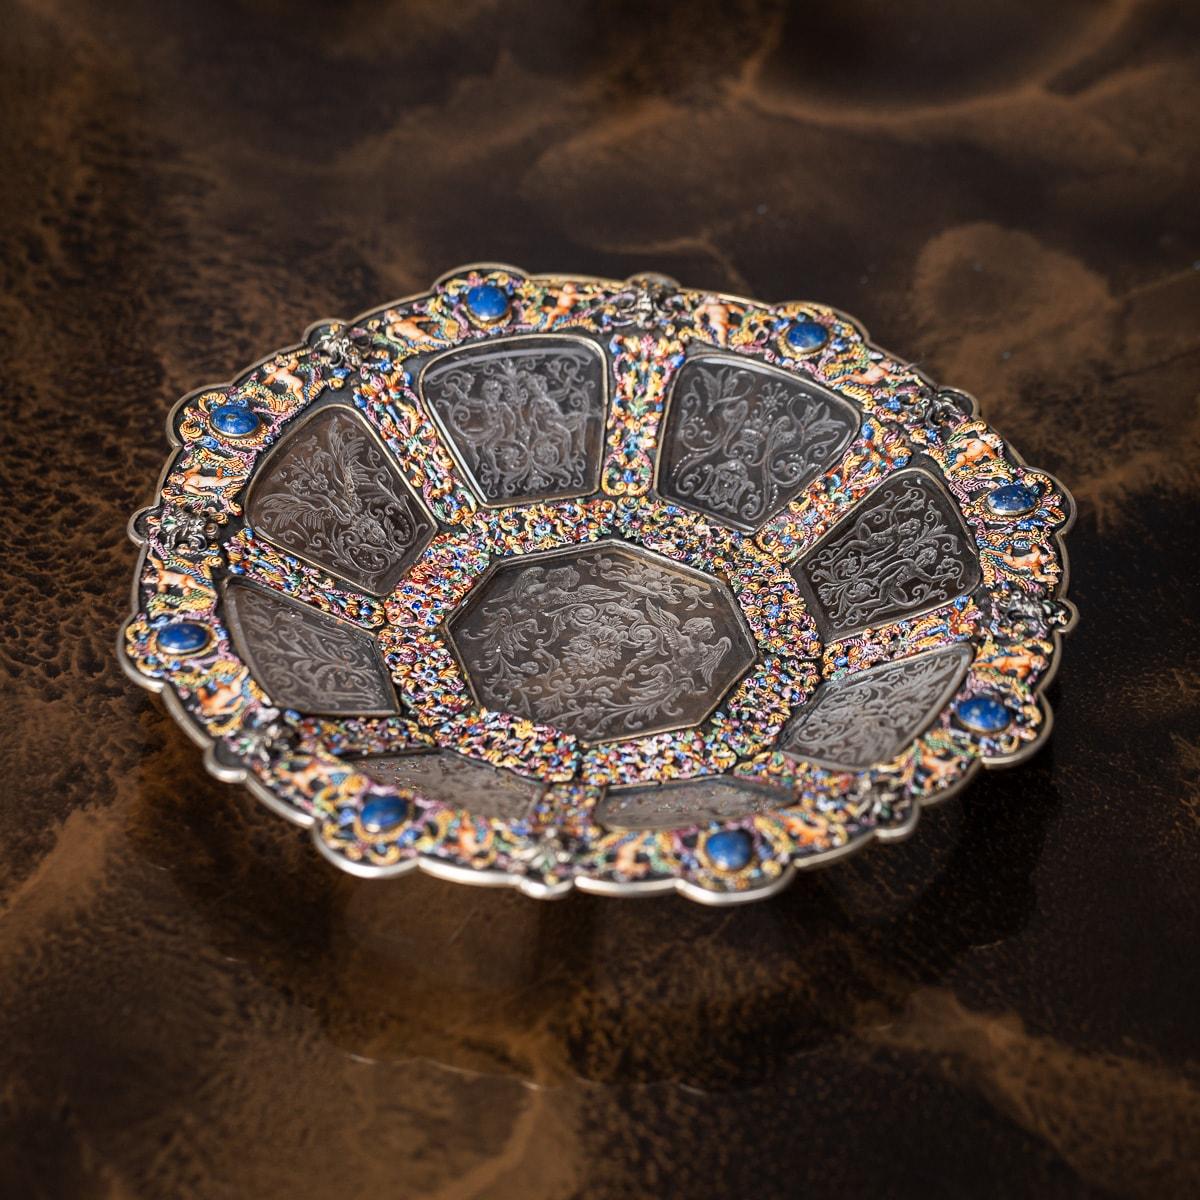 Antique 19th Century Austrian rare and unusual solid silver-gilt & enamel rock crystal dish. Enamelled with putti and pierced floral decoration, the frame set with blue cabouchon lapis lazuli and eight engraved rock crystal panels surrounding a